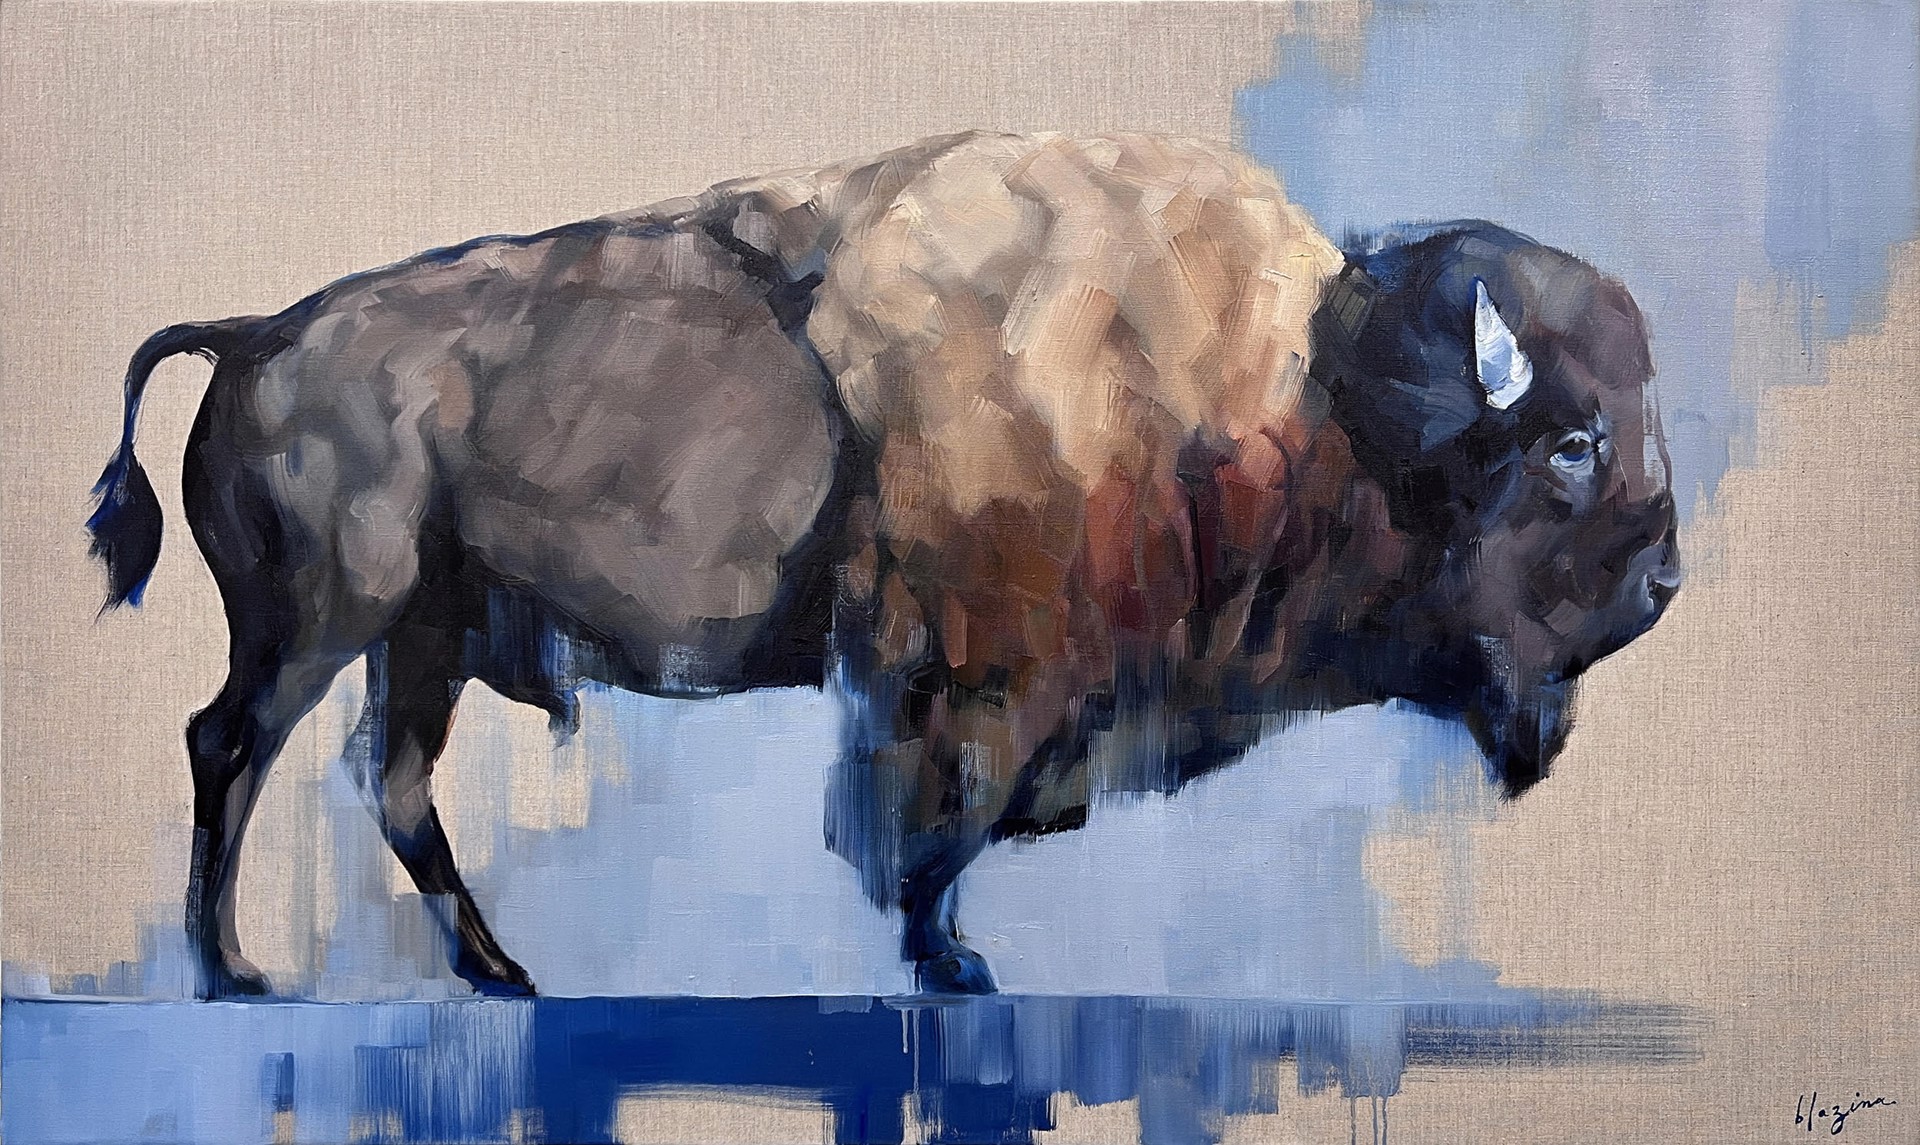 Original Oil Painting Featuring A Bison Walking In Profile With Blue Abstract Background And Exposed Linen